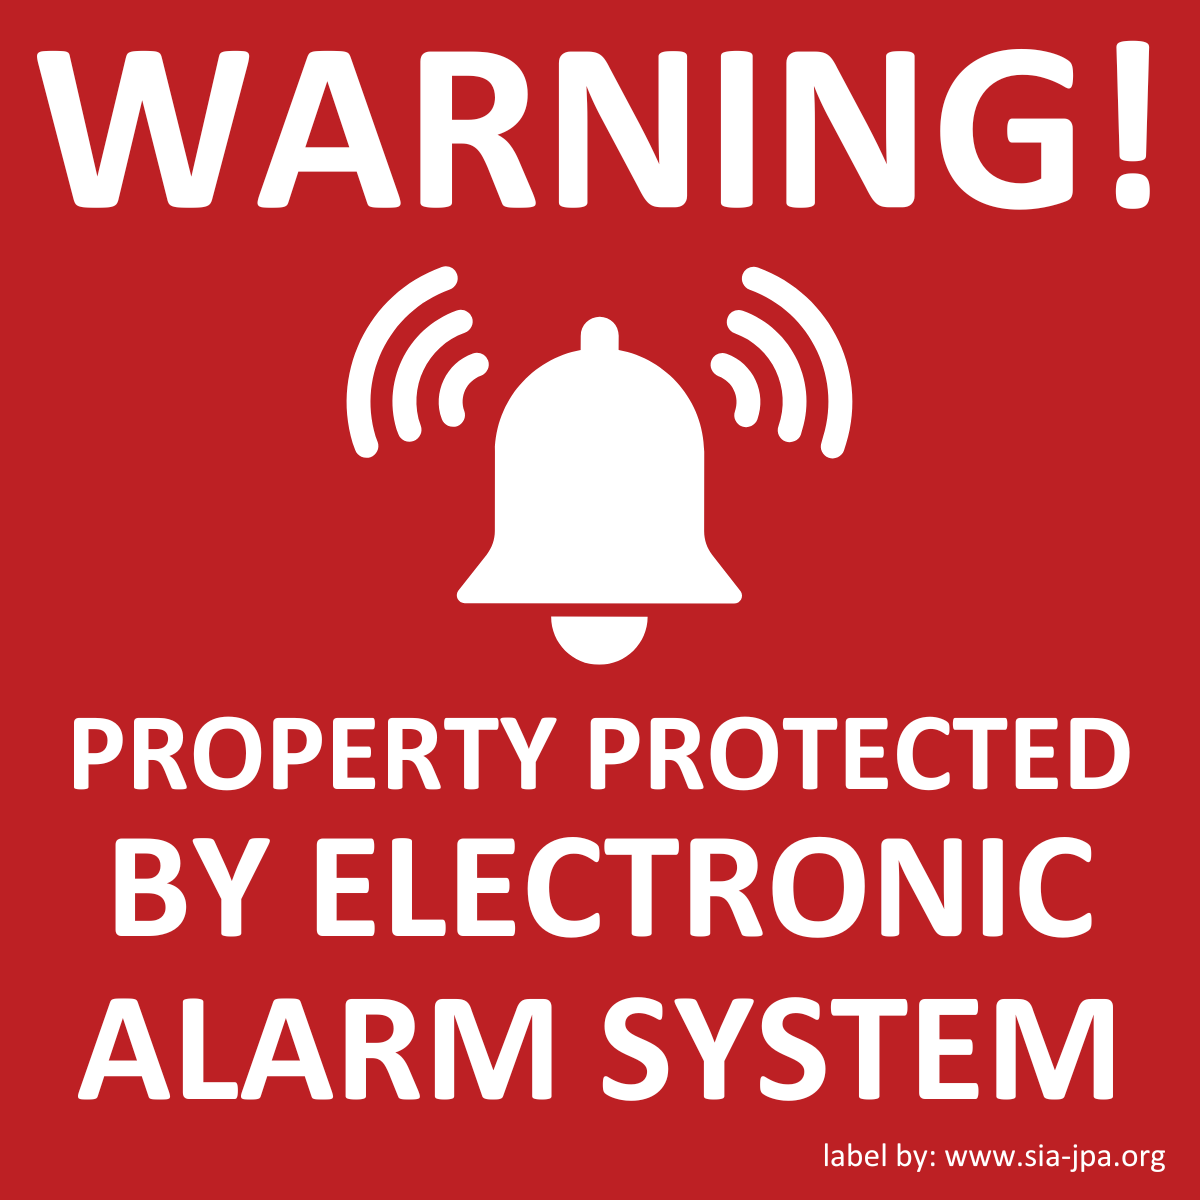 Warning! Property protected by electronic alarm system